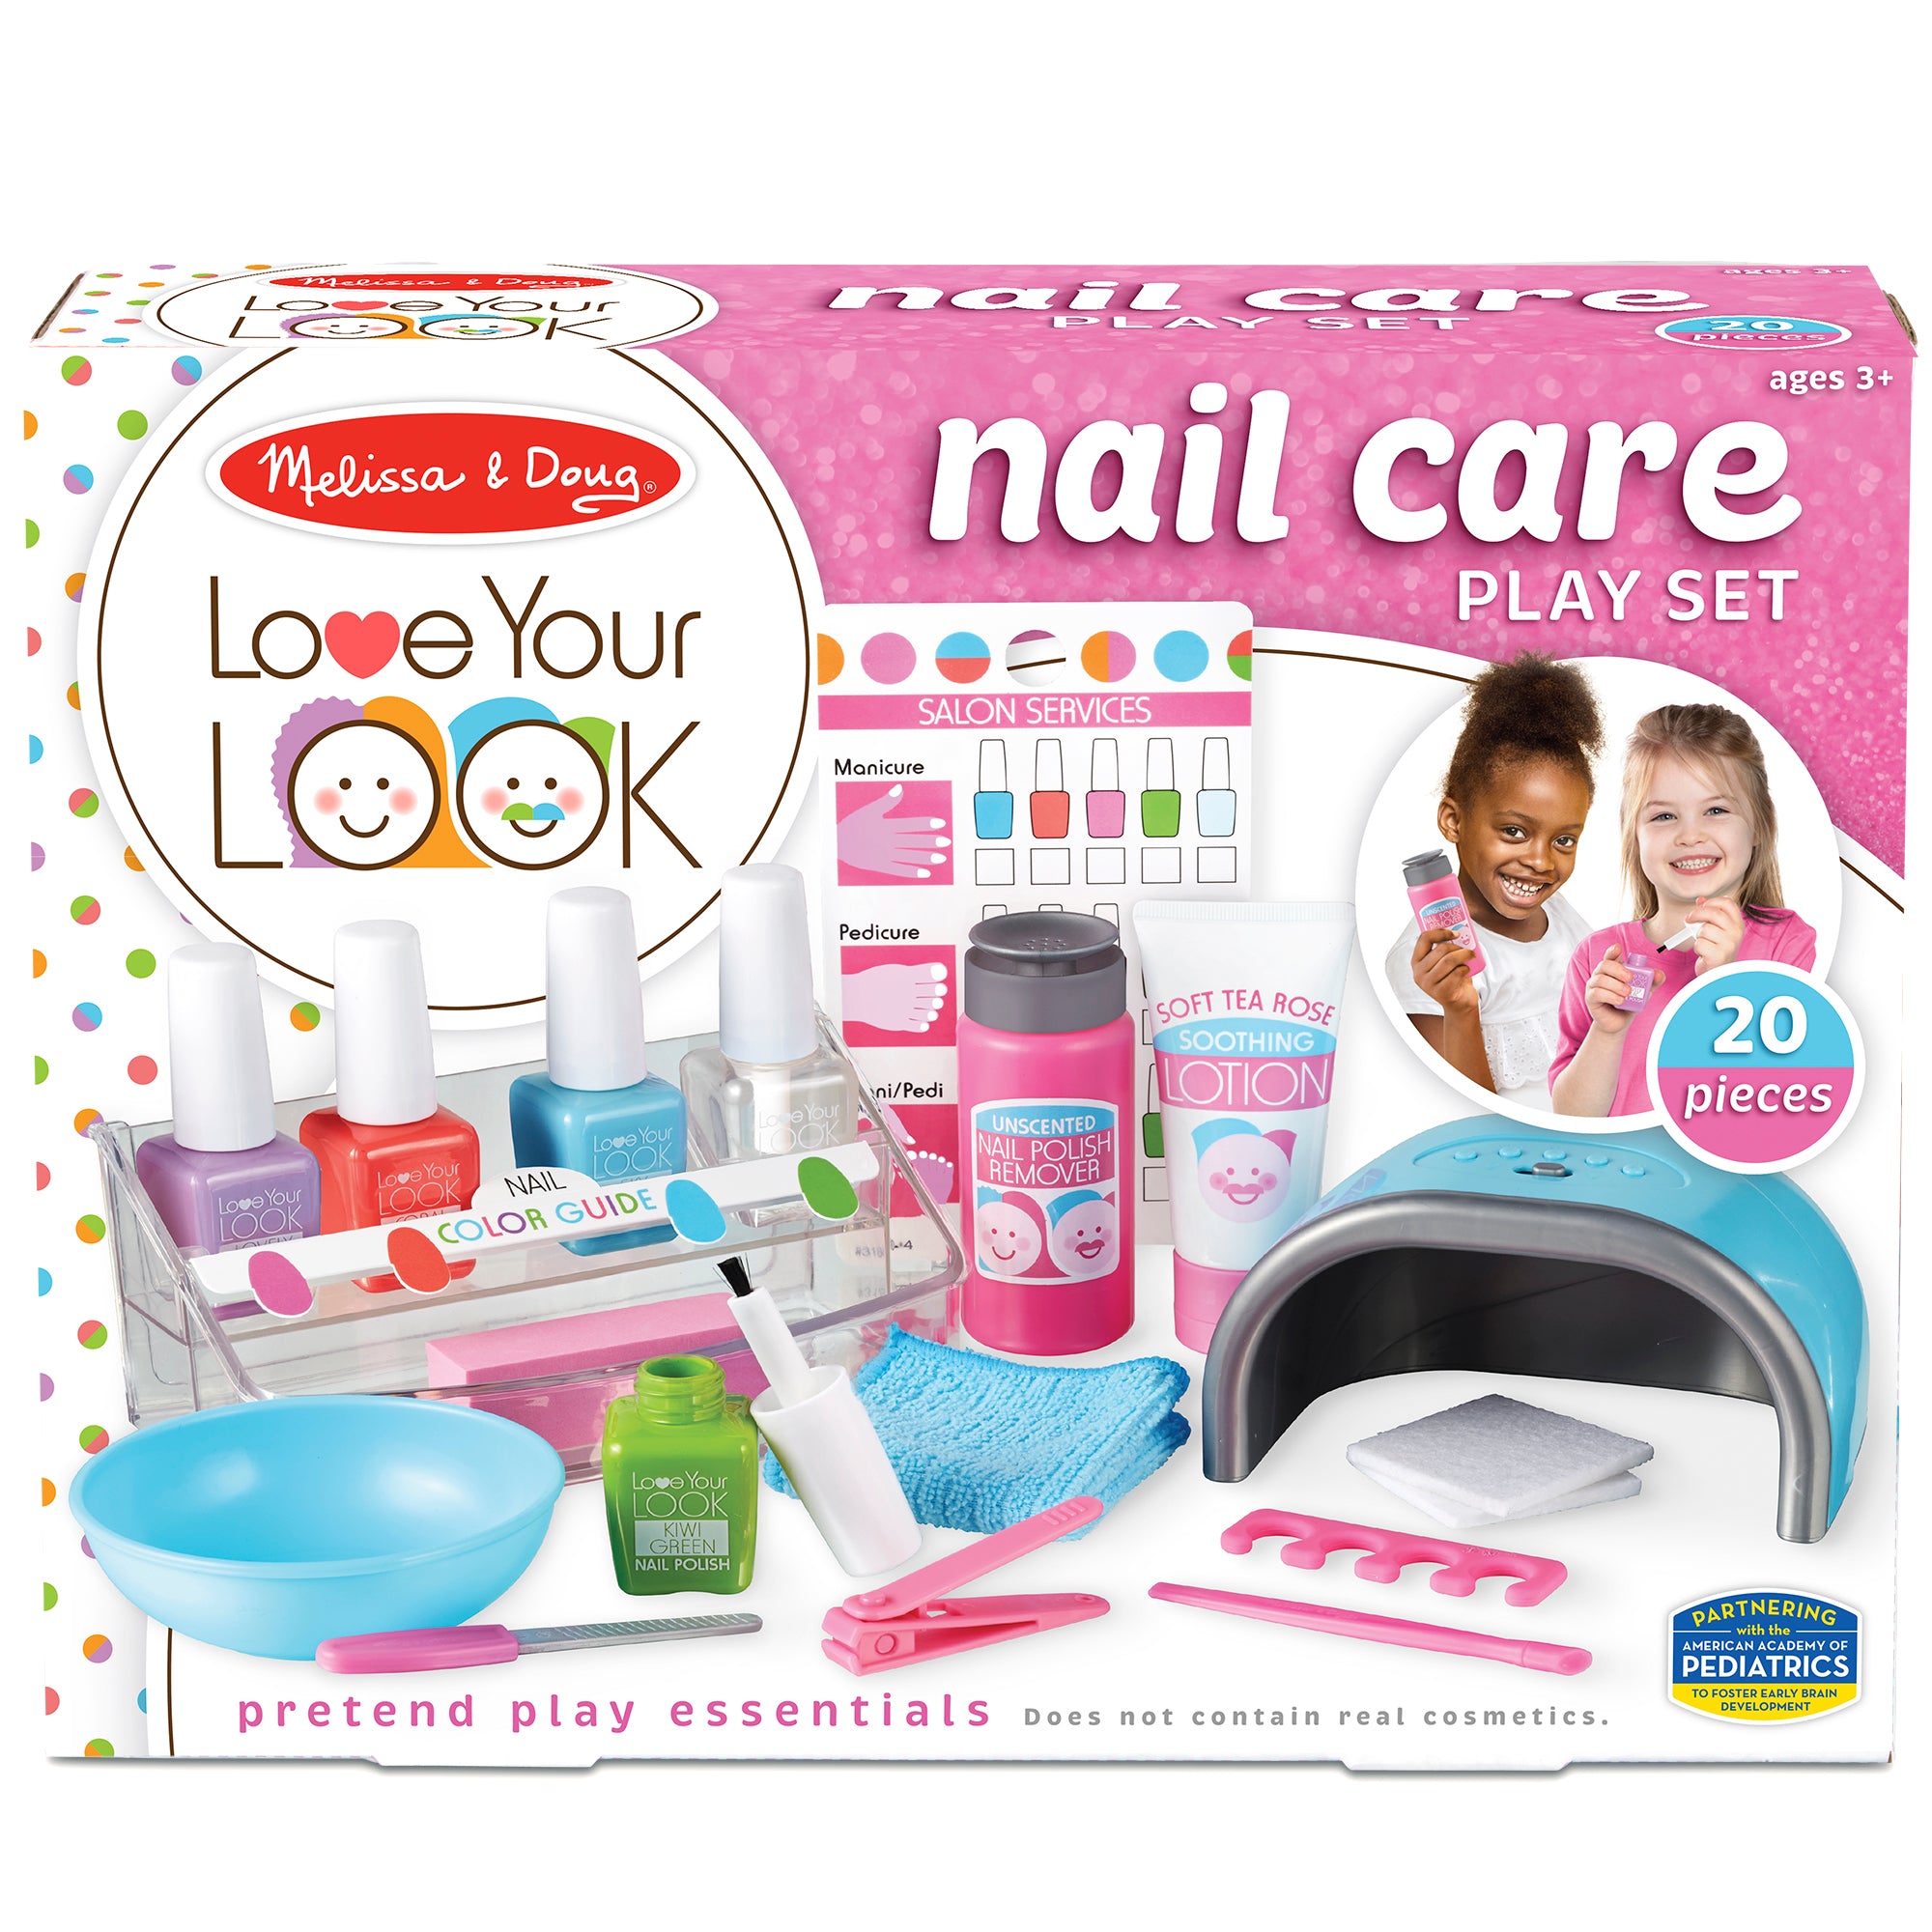 LOVE YOUR LOOK - Nail Care Play